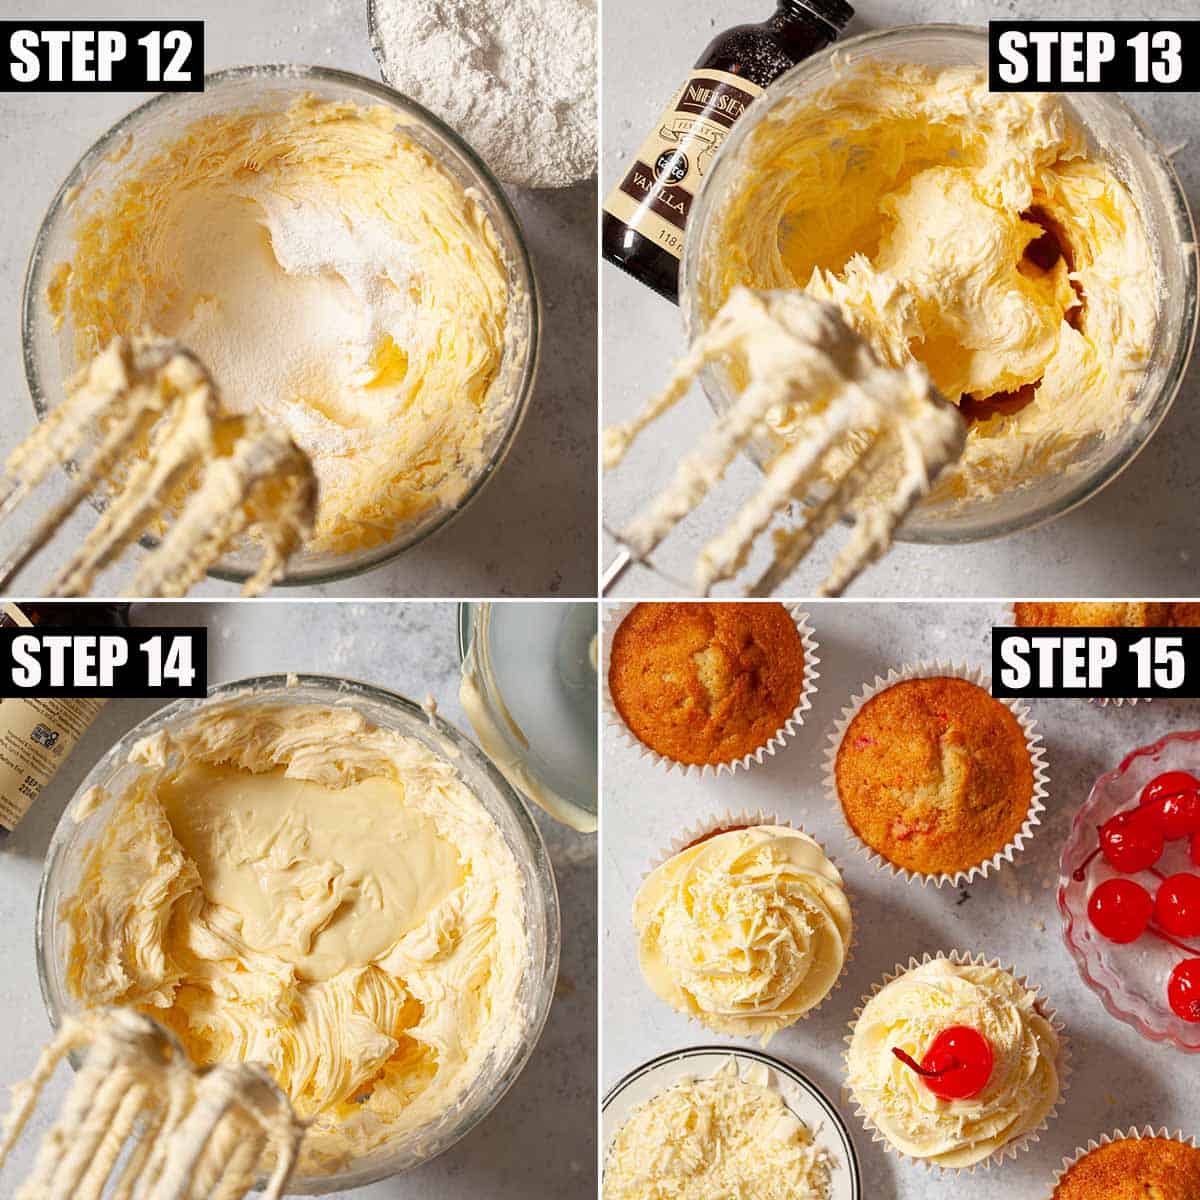 Collage of images showing white chocolate buttercream being made and used to top small cakes.